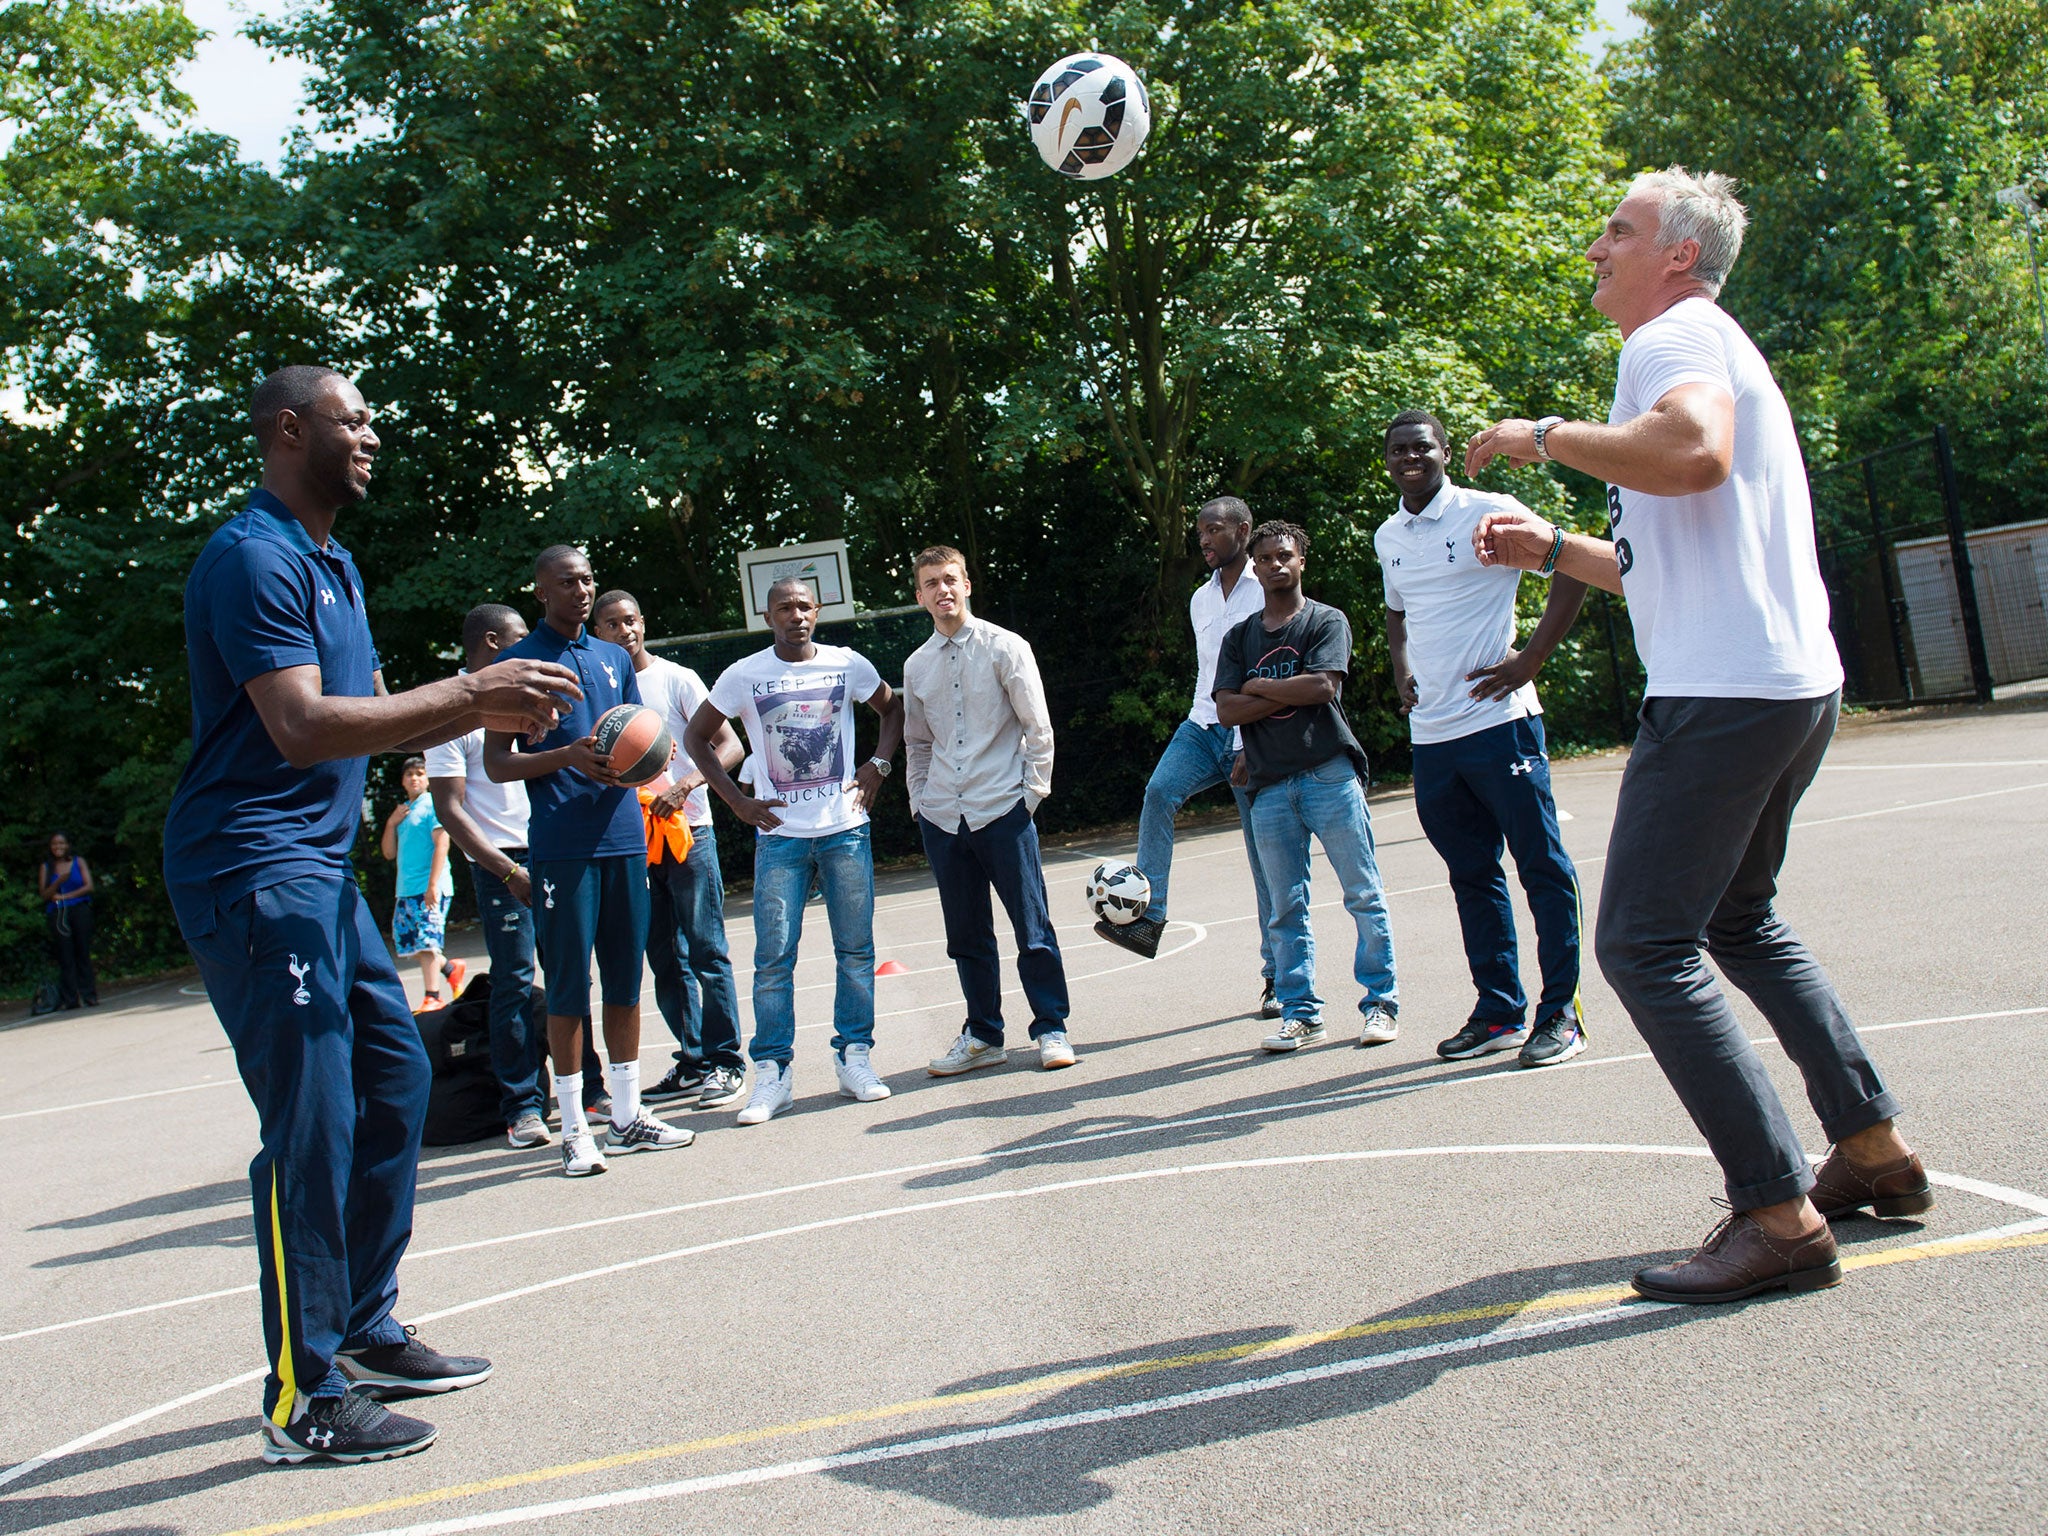 Ledley King and David Ginola perform keepy-uppys in front of members of the To Care Is To Do program